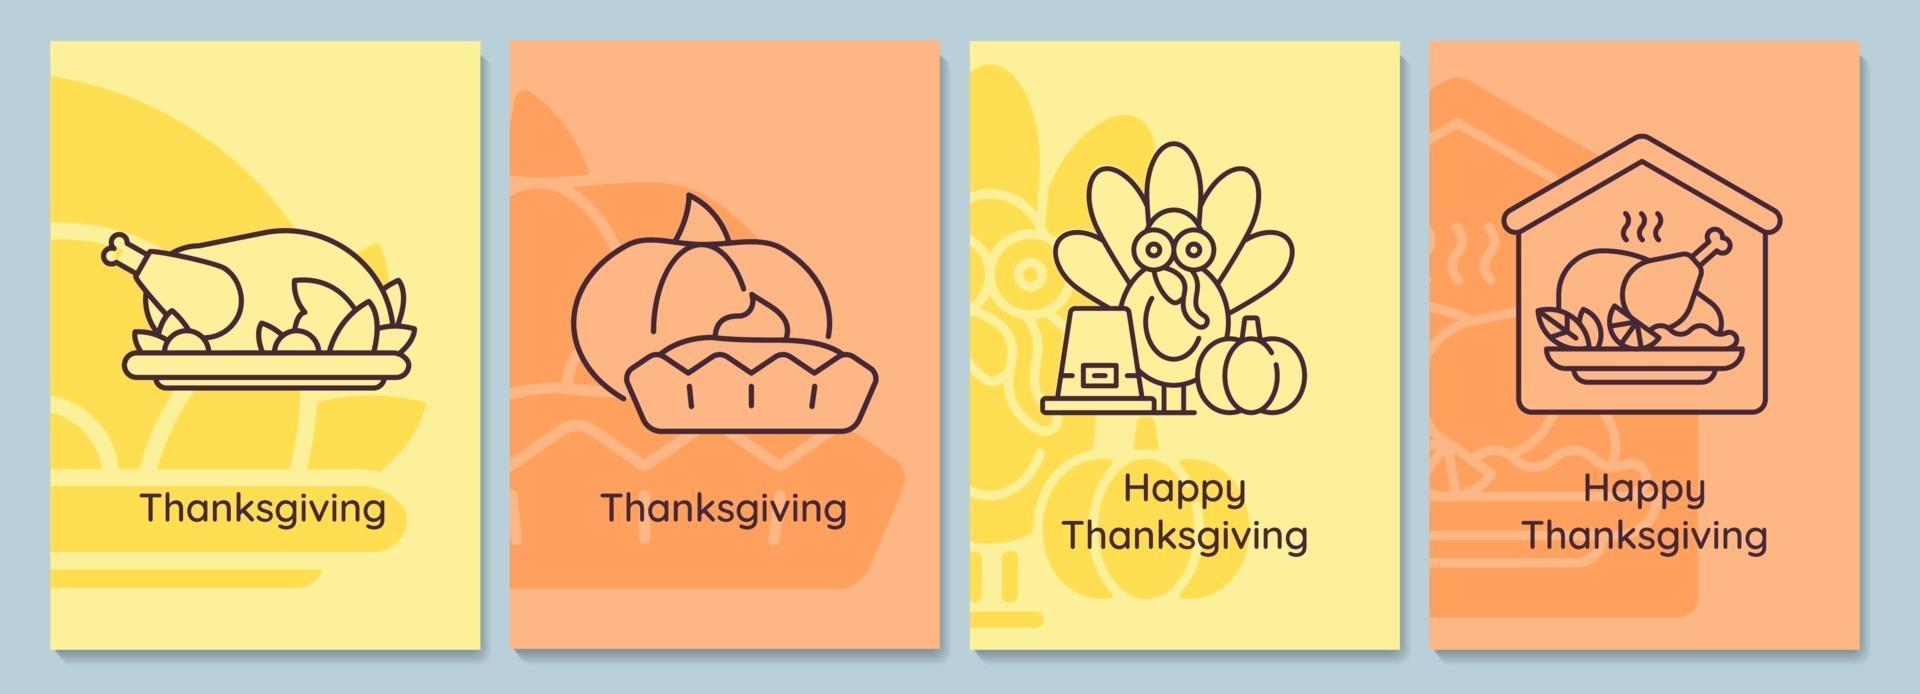 Thanksgiving holidays postcards with linear glyph icon set vector